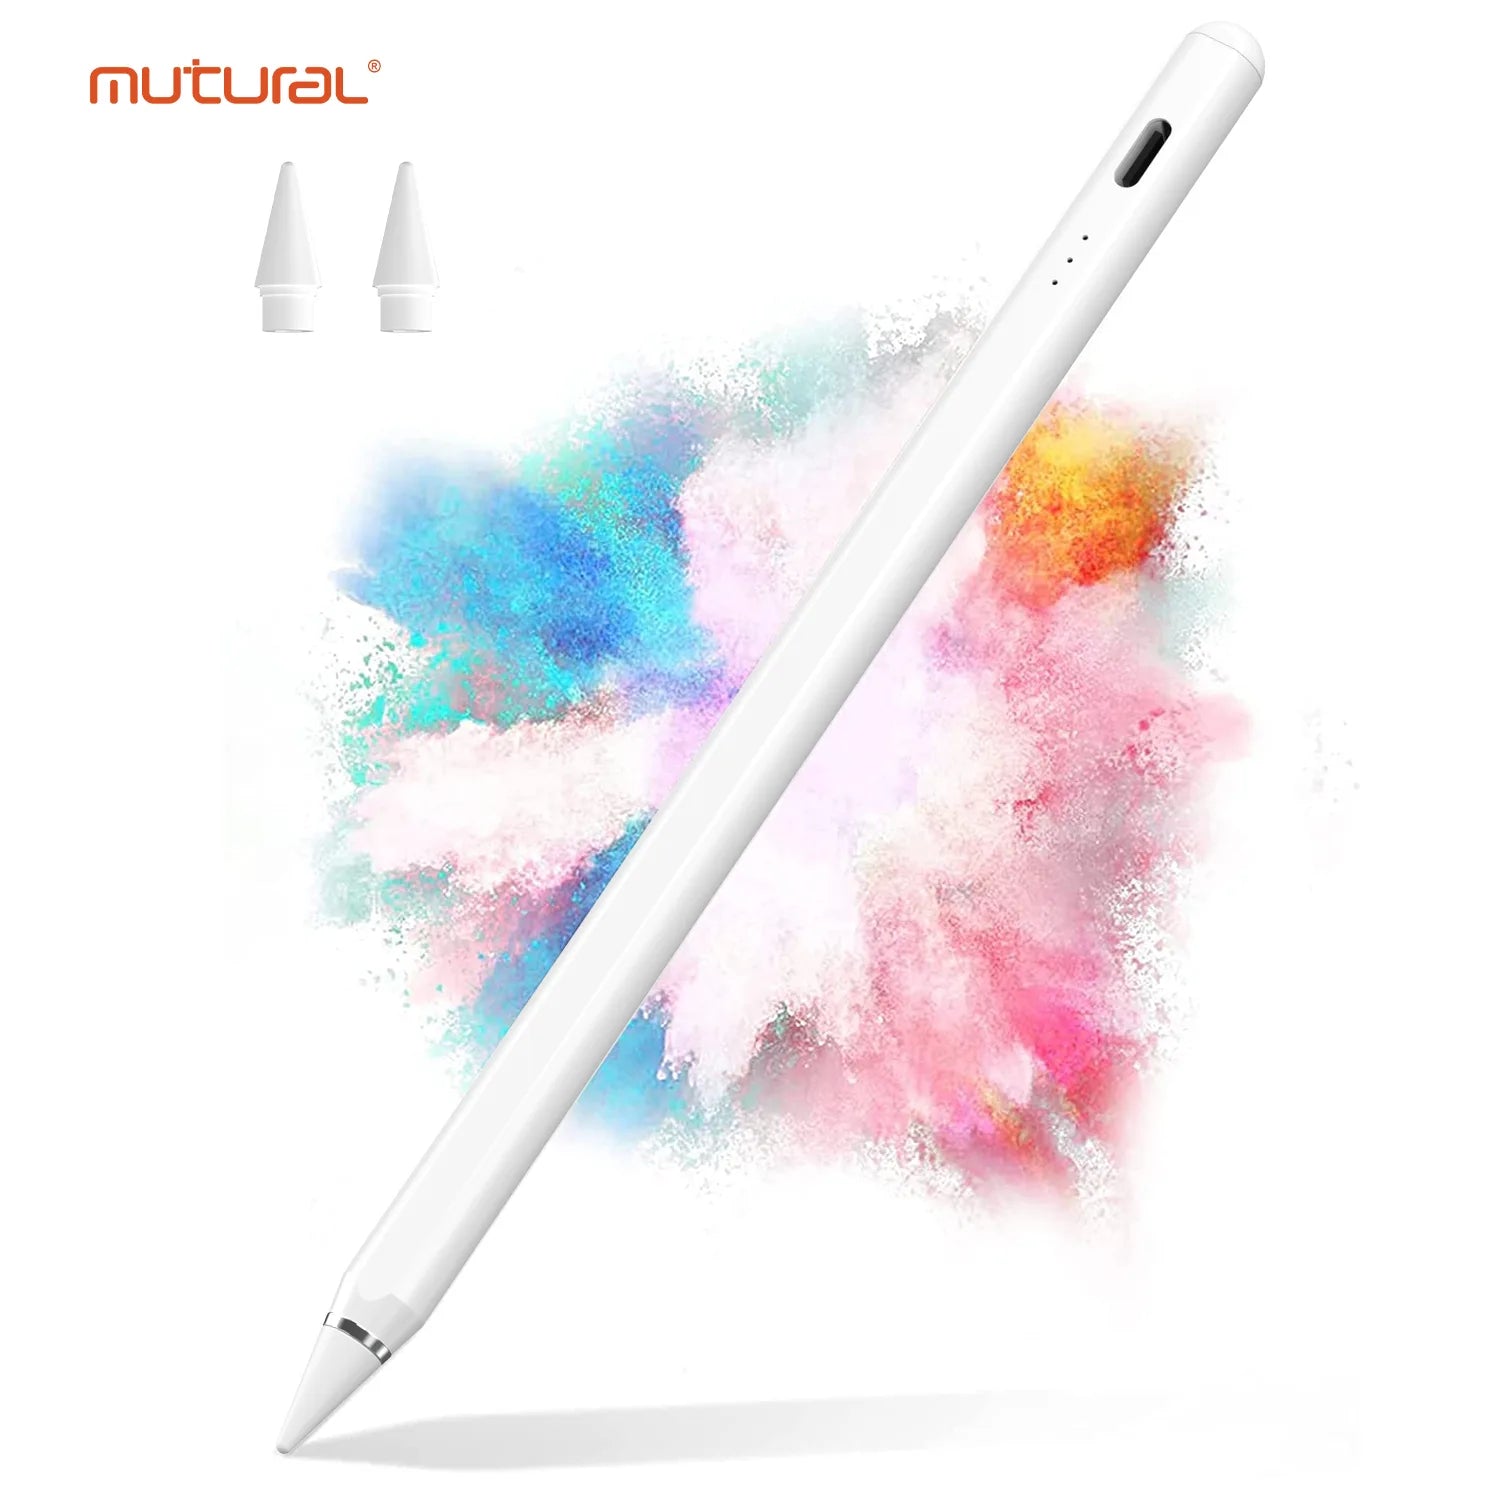 Mutural 950D Universal Stylus for iPad and Andorid Tablets, White